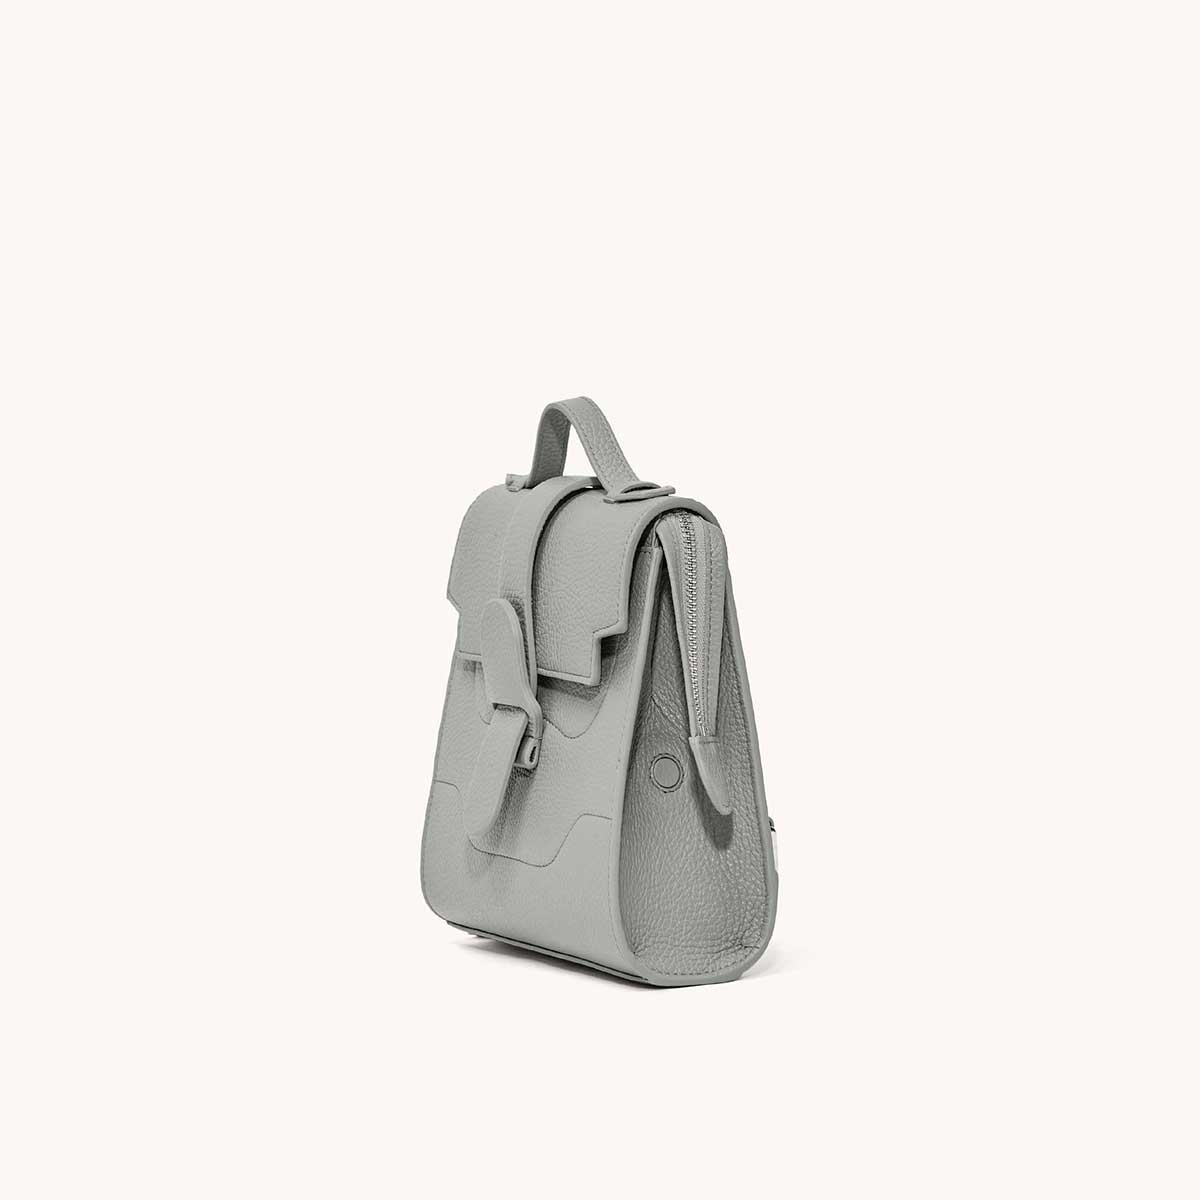 alunna bag dolce dove side view left